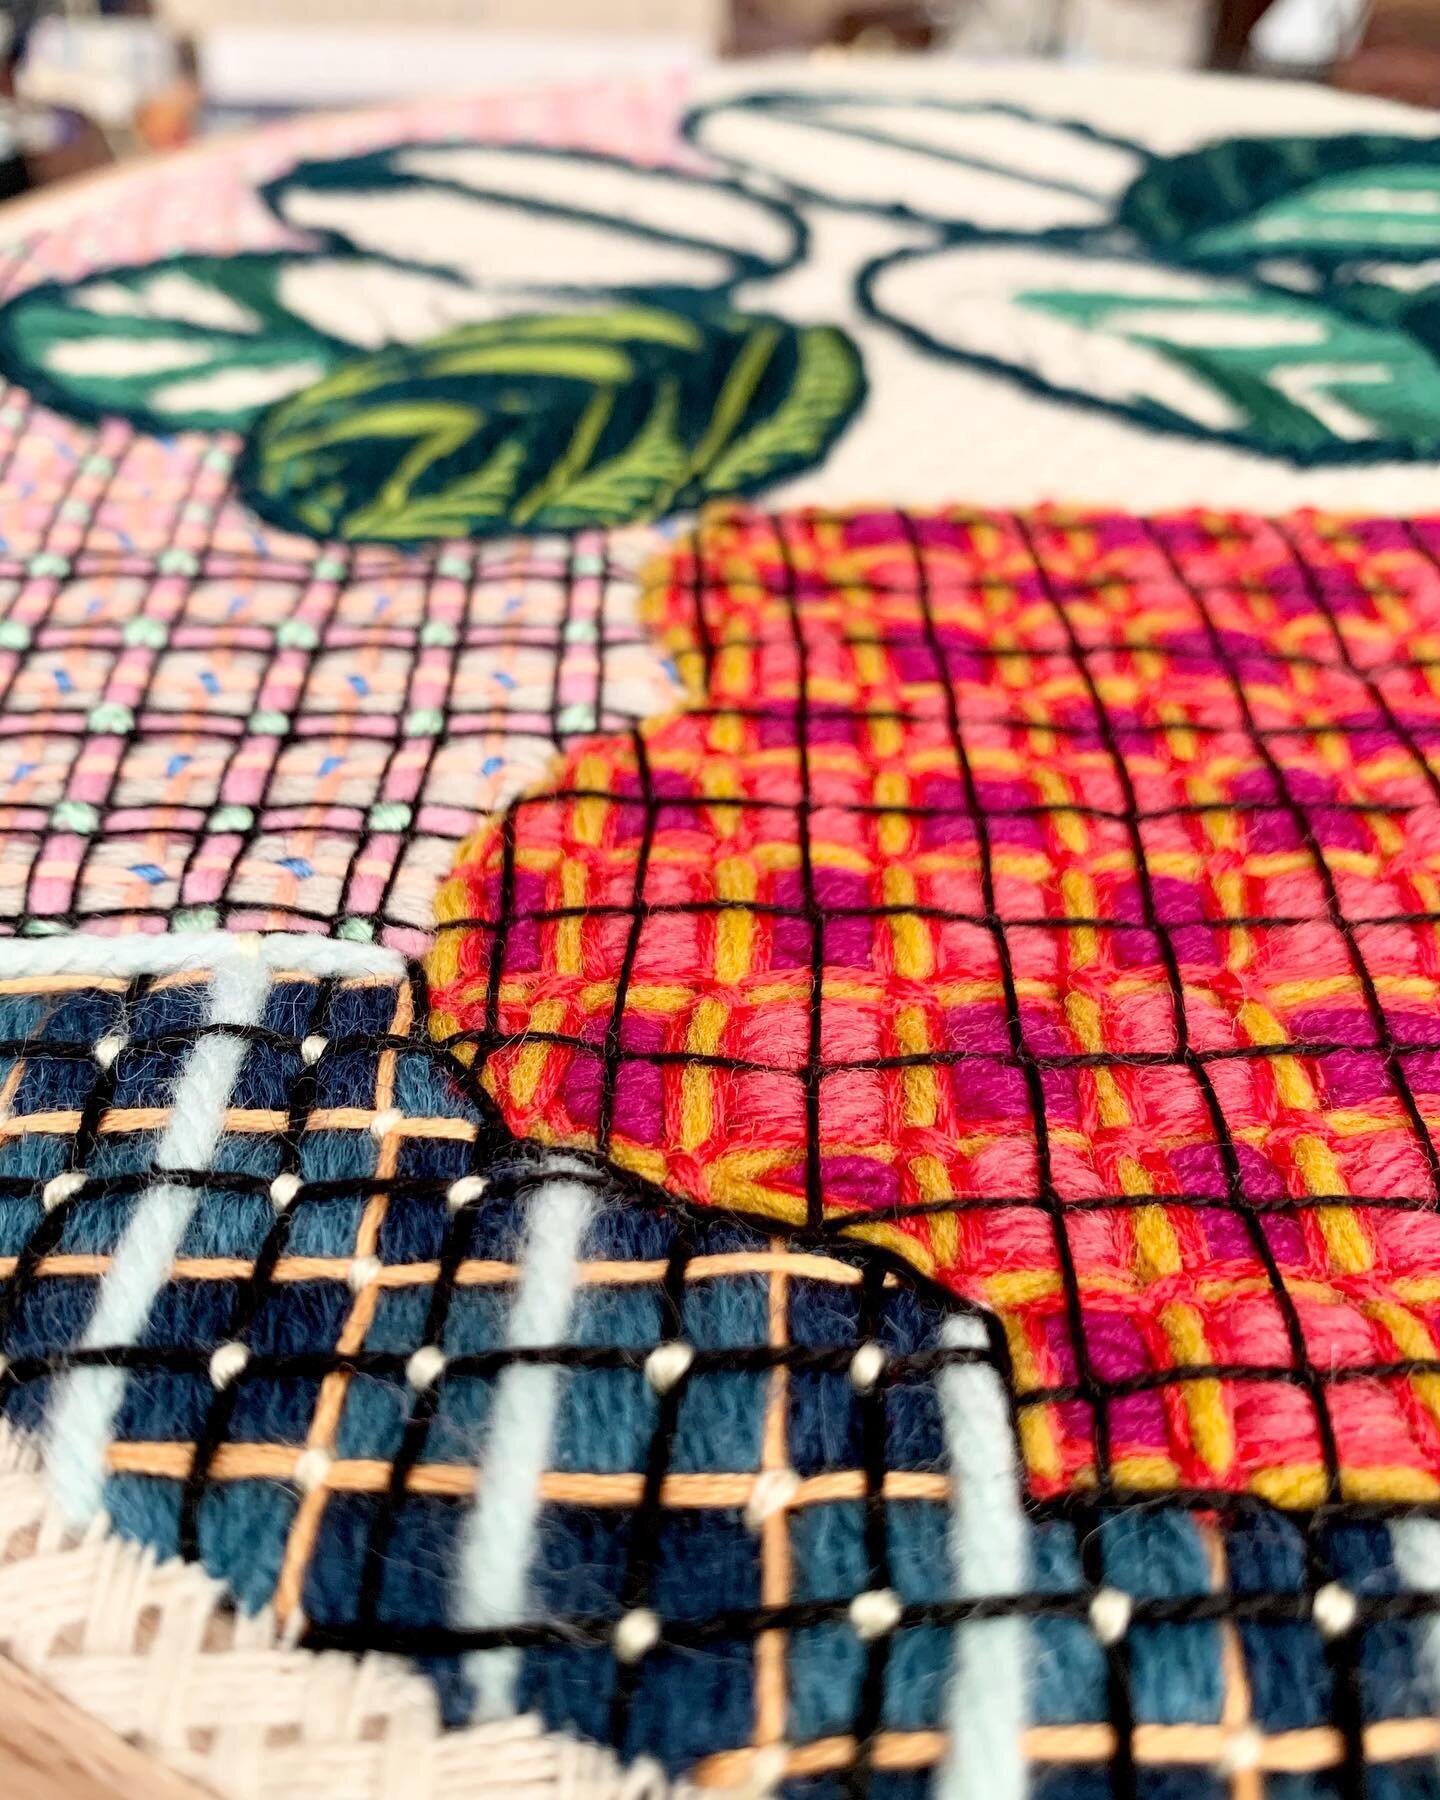 Grids on grids on grids.

When I started this piece earlier this week I thought using larger fibers (thrifted yarn and crewel wool) I intended to explore scale and keep things relatively simple...but &ldquo;simple&rdquo; is not really within my natur